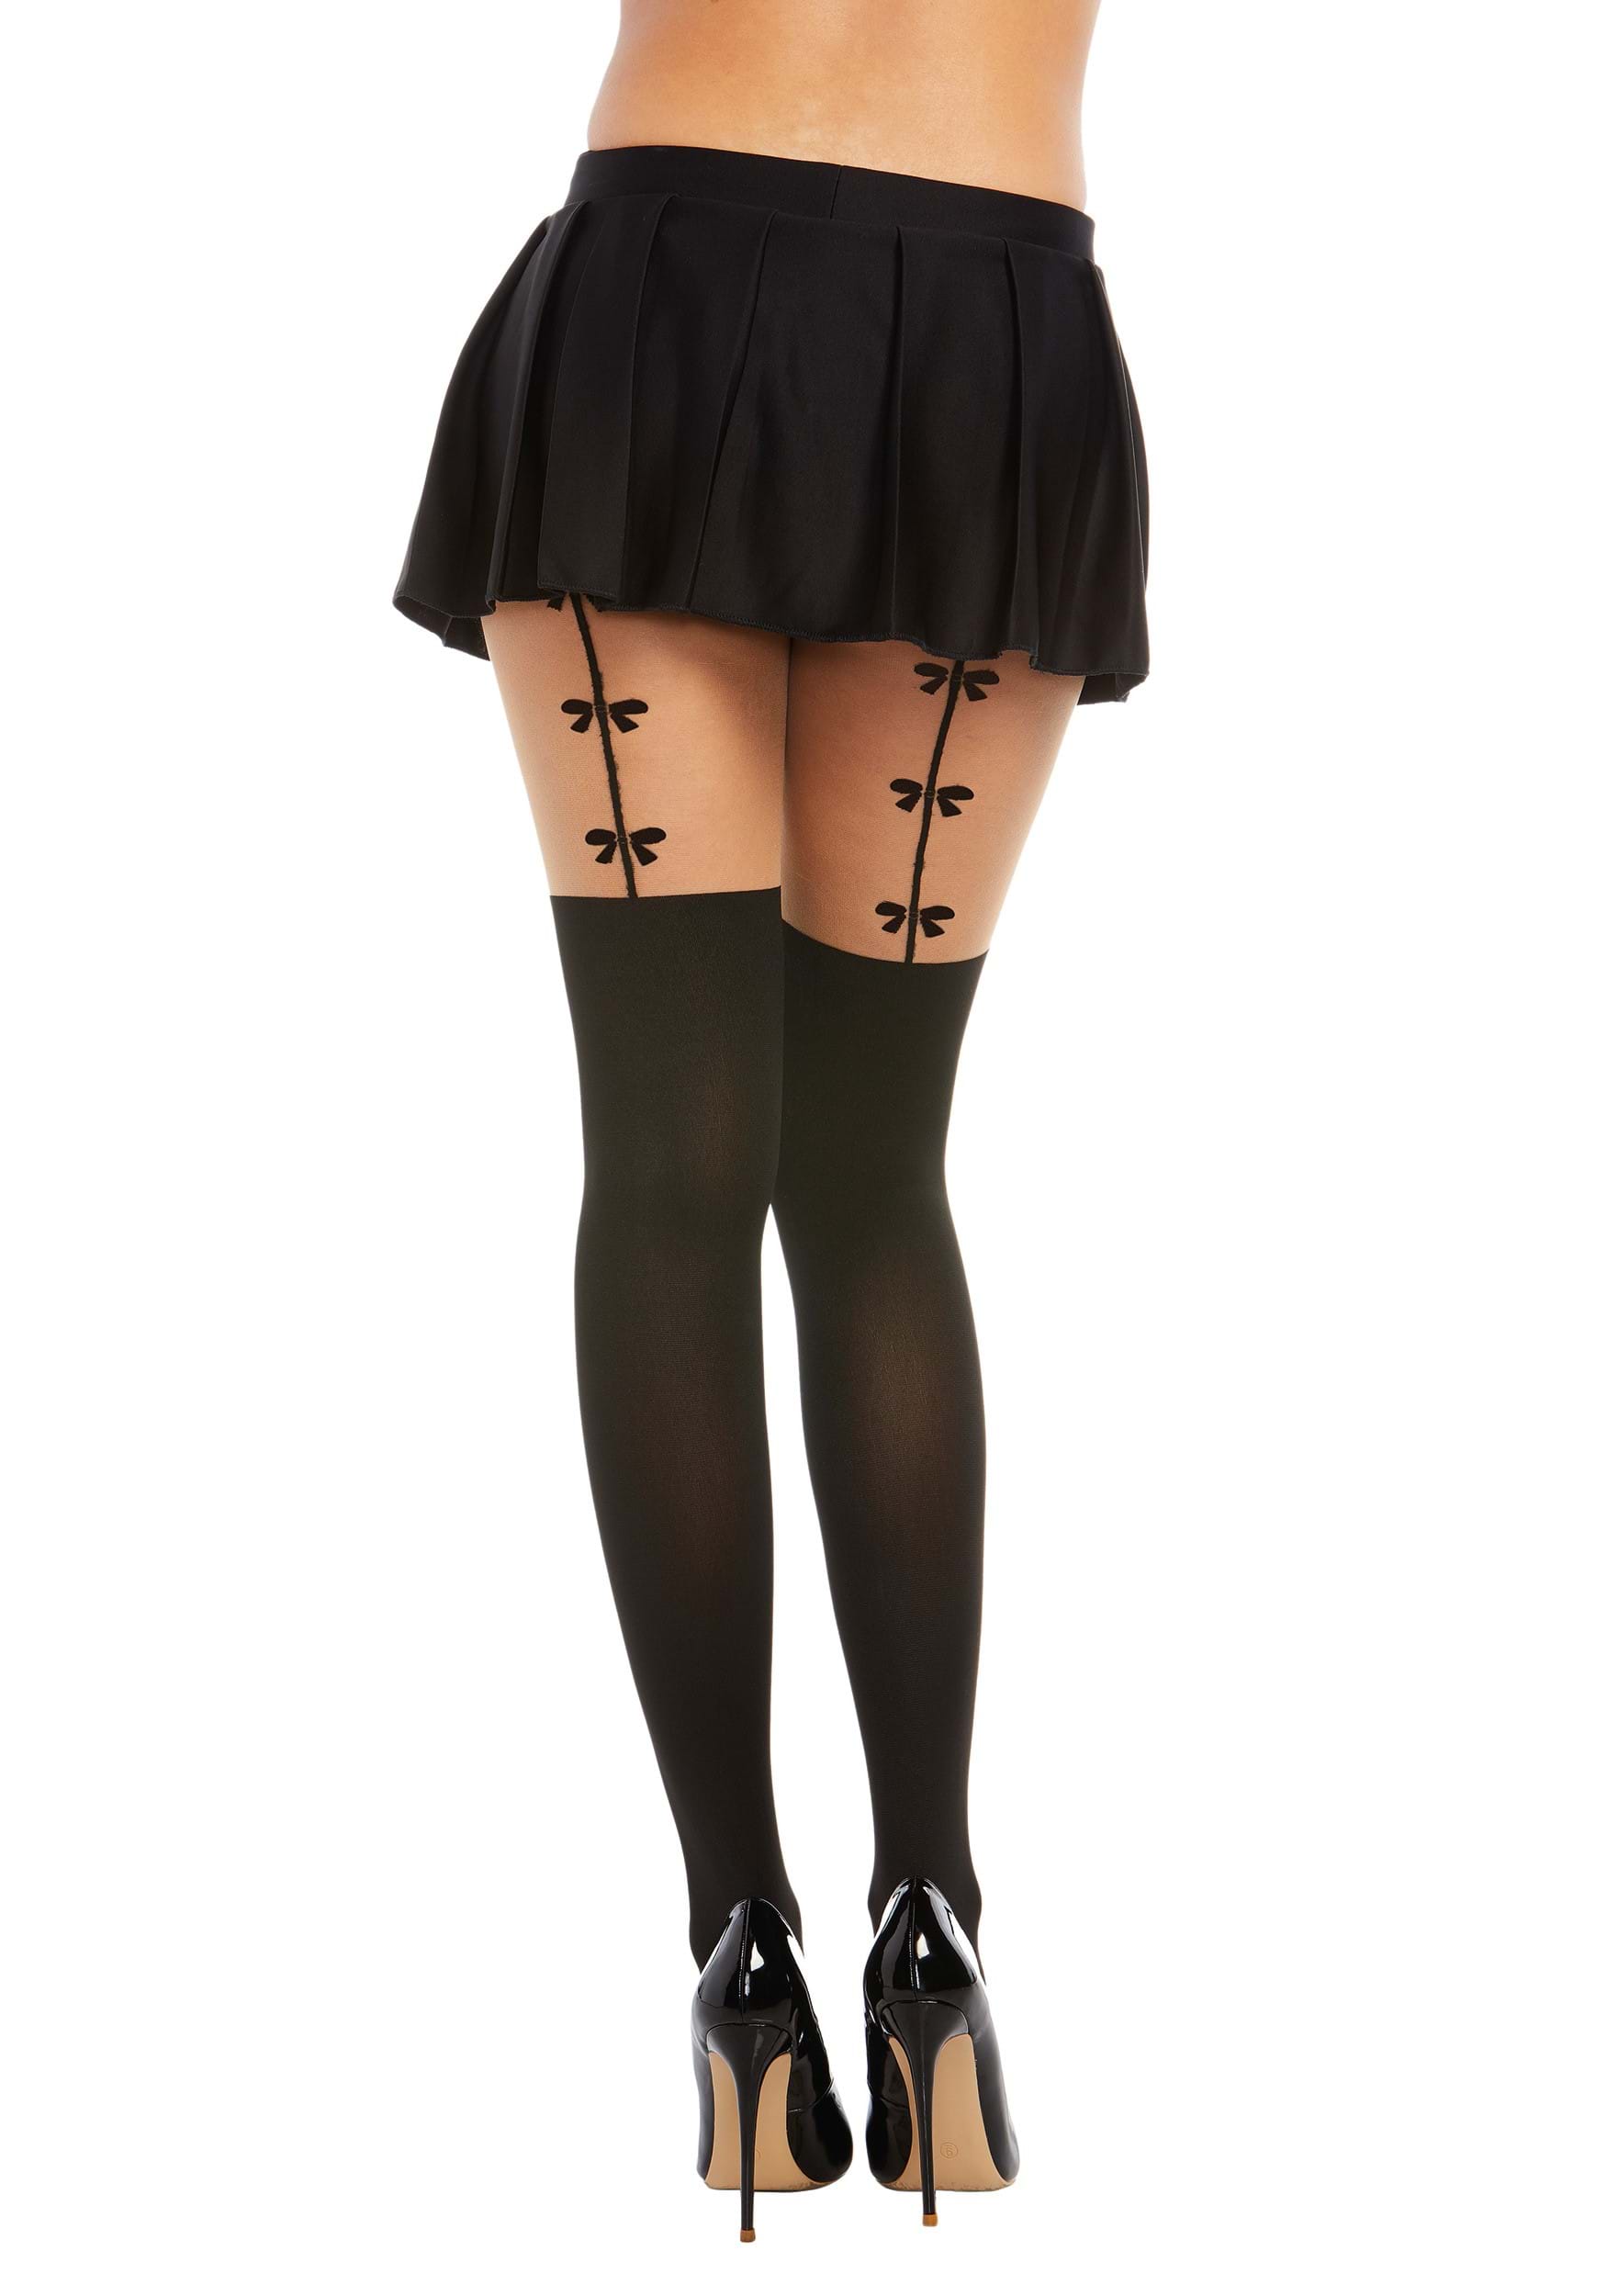 https://images.halloween.com/products/92729/2-1-274086/womens-sheer-beige-and-black-faux-thigh-highs-alt-1.jpg